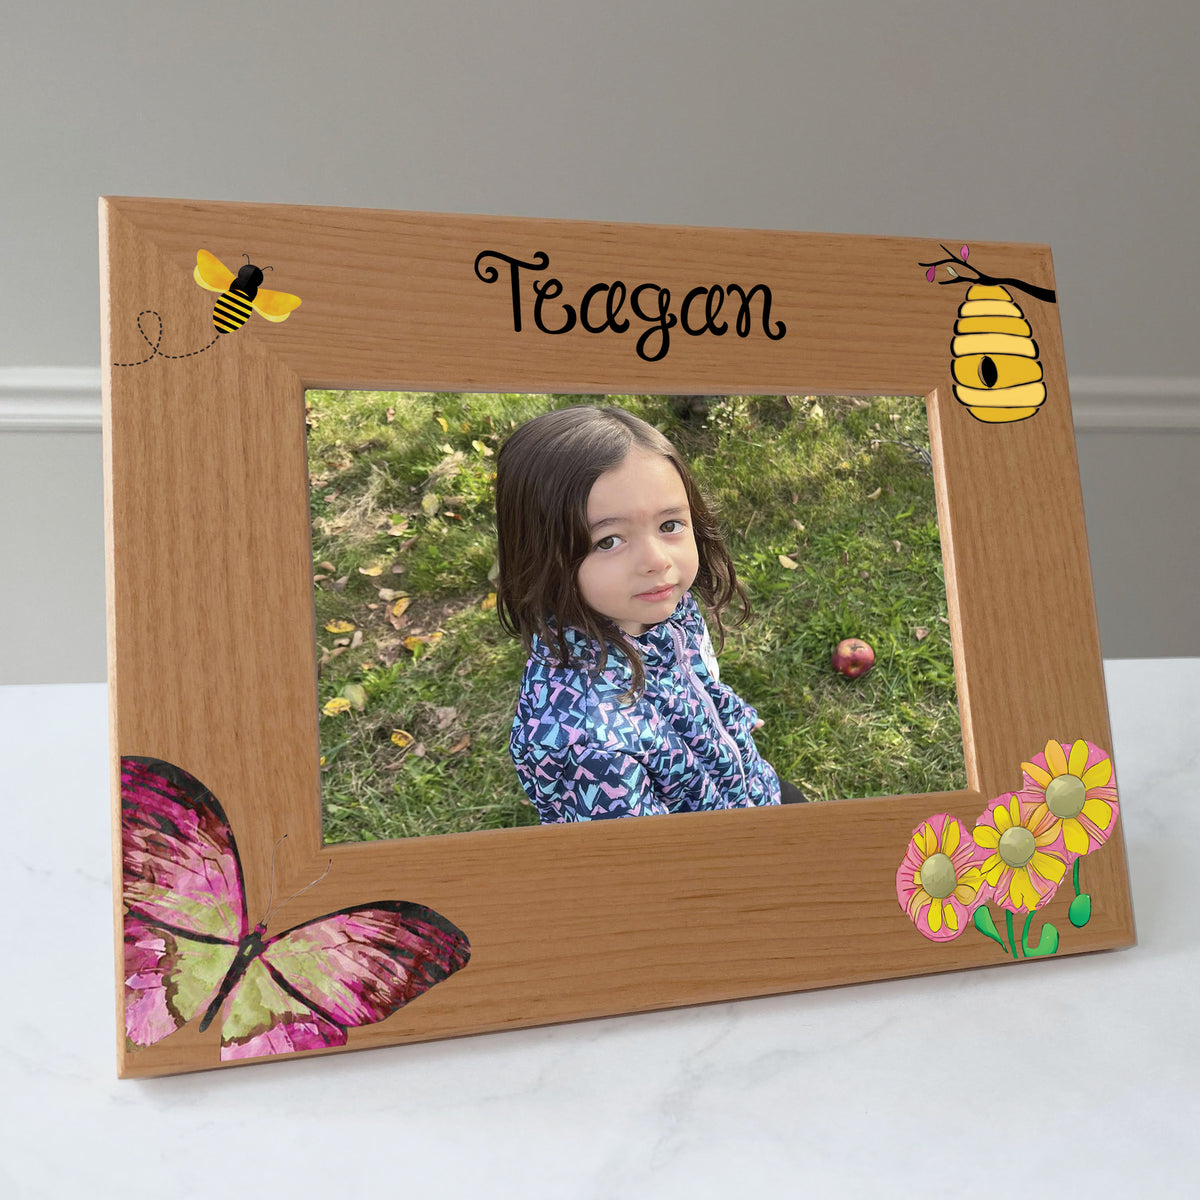 Butterfly flowers picture frame personalized, Baby gift / 4x6 photo frame / Printed